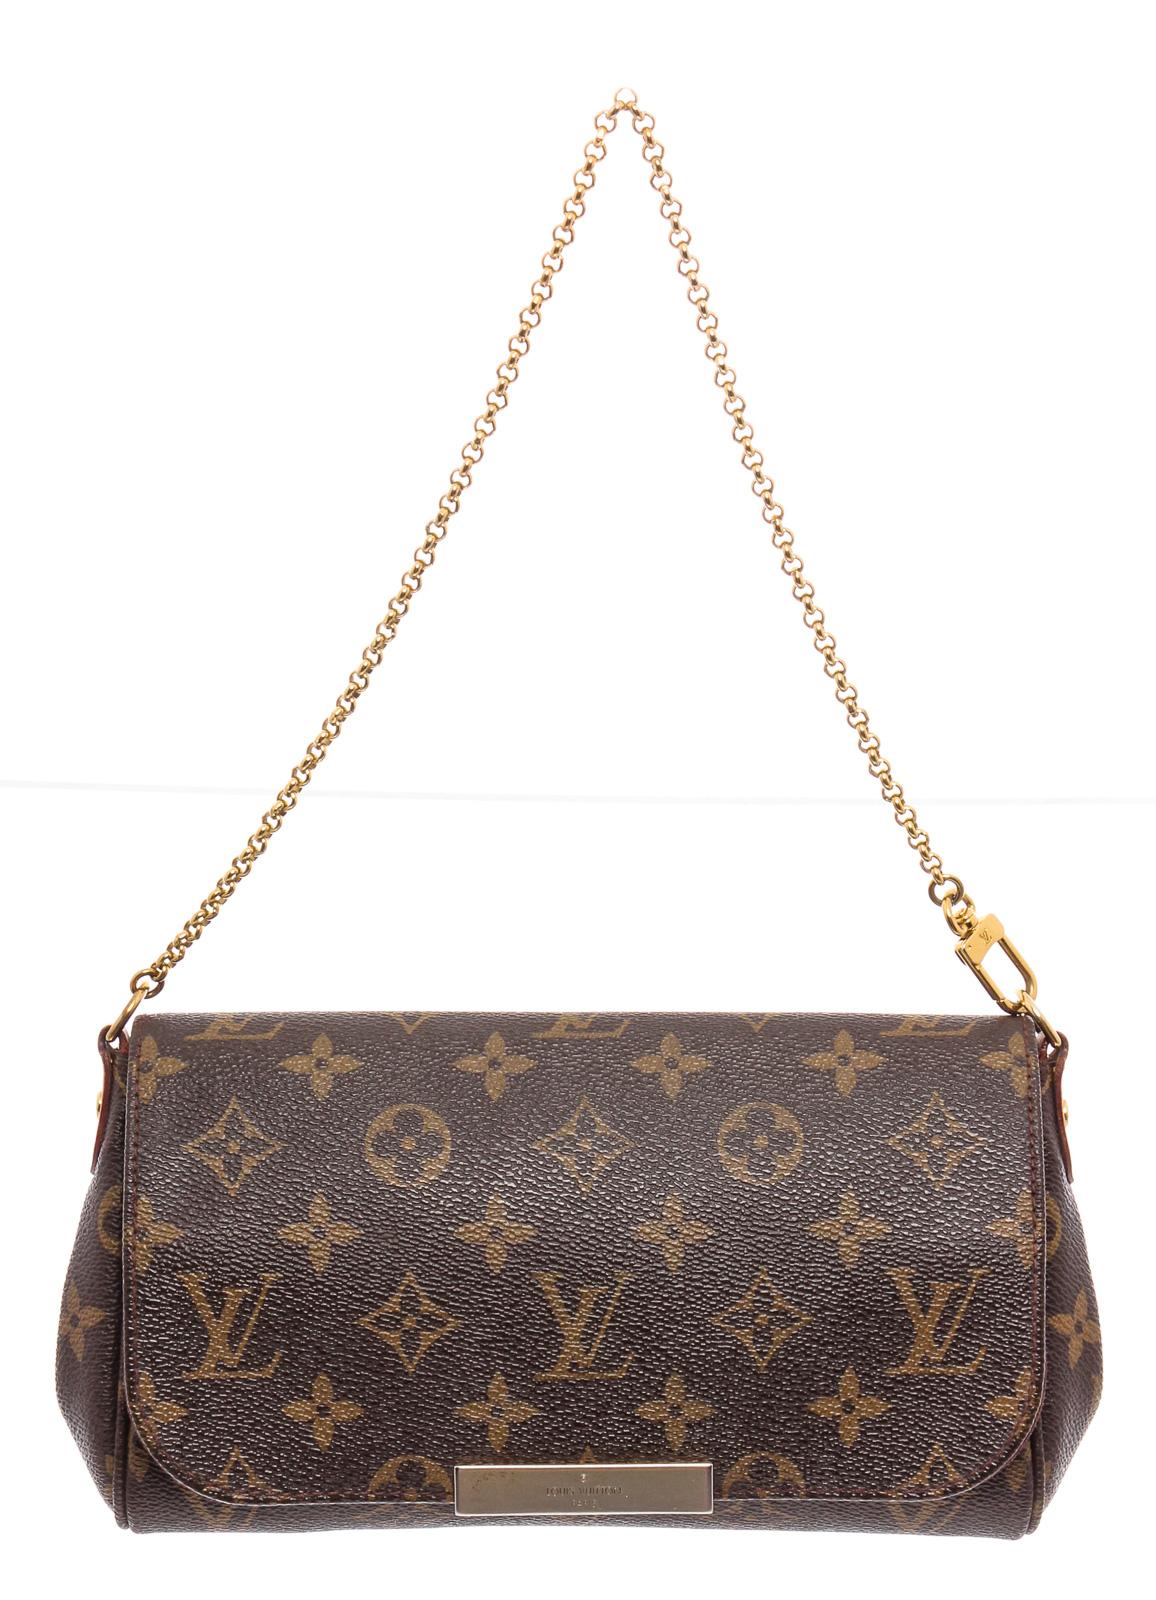 Brown and tan monogram coated canvas Louis Vuitton Favorite PM with brass hardware, single top handle with chain-link accent, single flat shoulder strap, burgundy canvas lining, single slit pocket at interior wall and flap with magnetic closure at